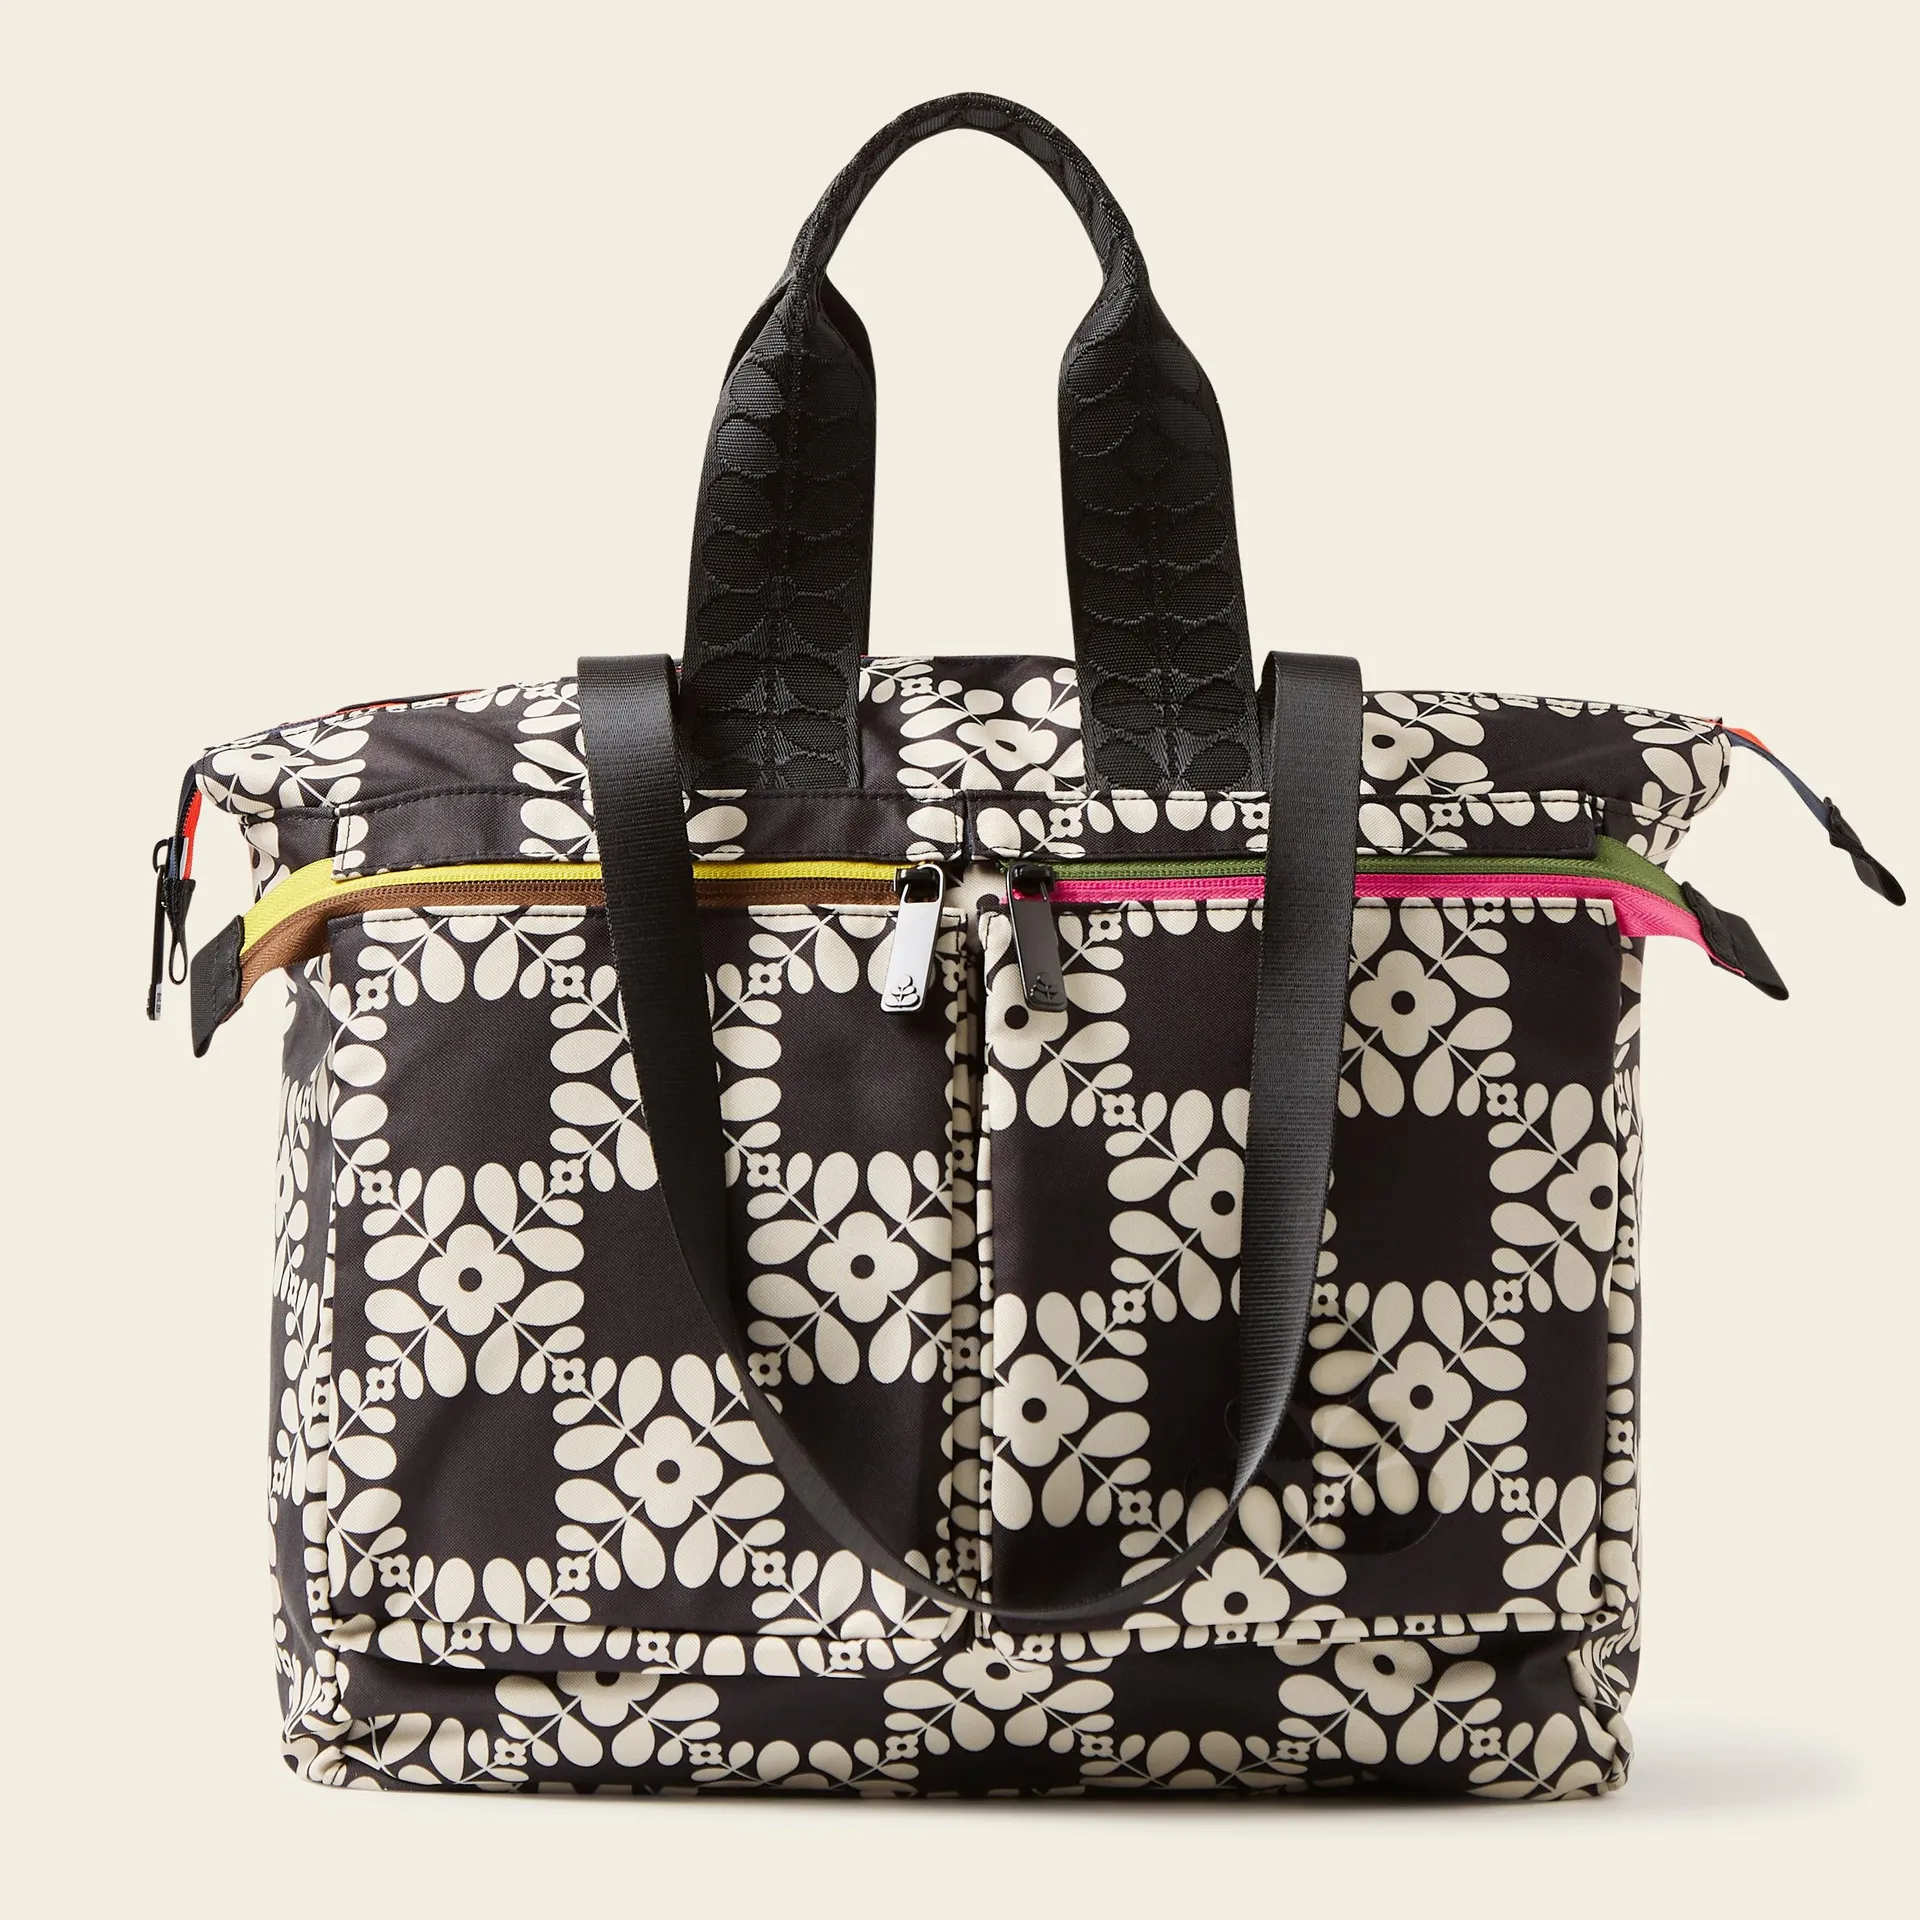 Axis Tote in Lattice Flower Tile Onyx